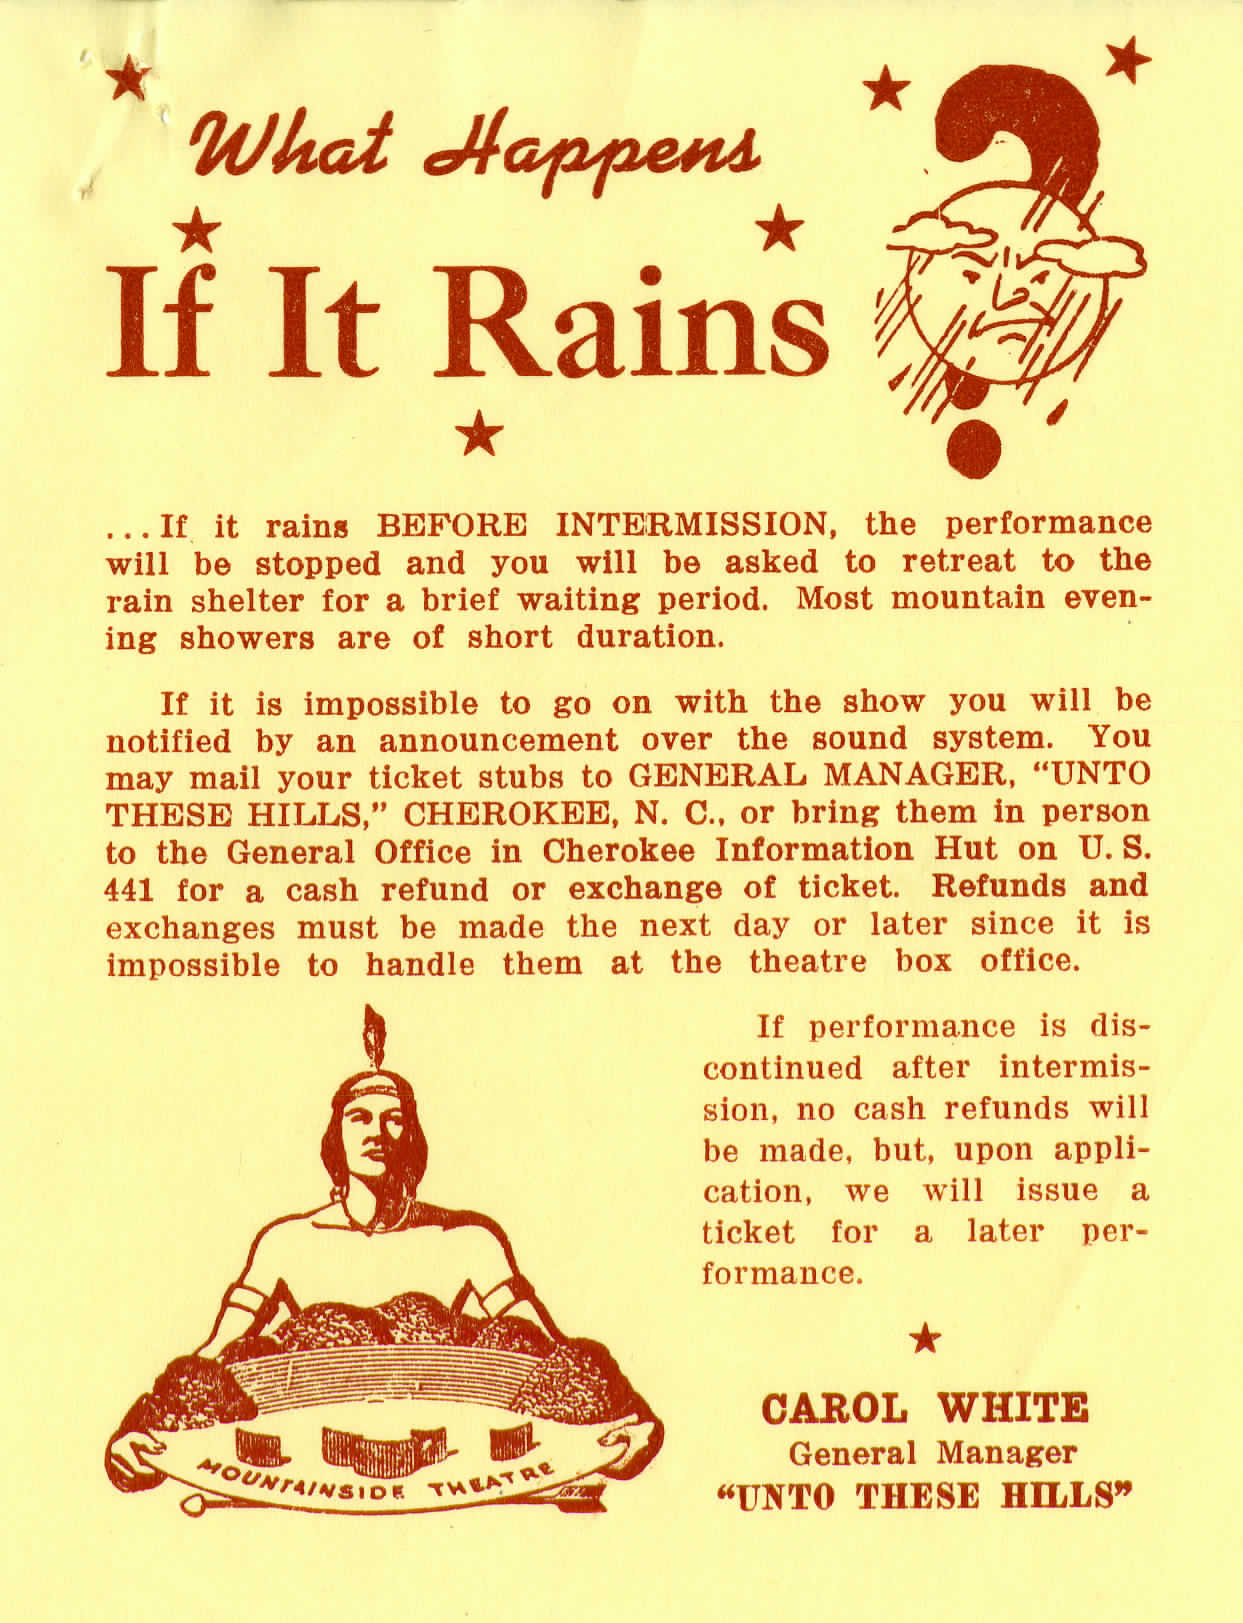 "rain slip" with information about refunds and other information for ticket holders in the event of rain during the performance of "Unto These Hills"